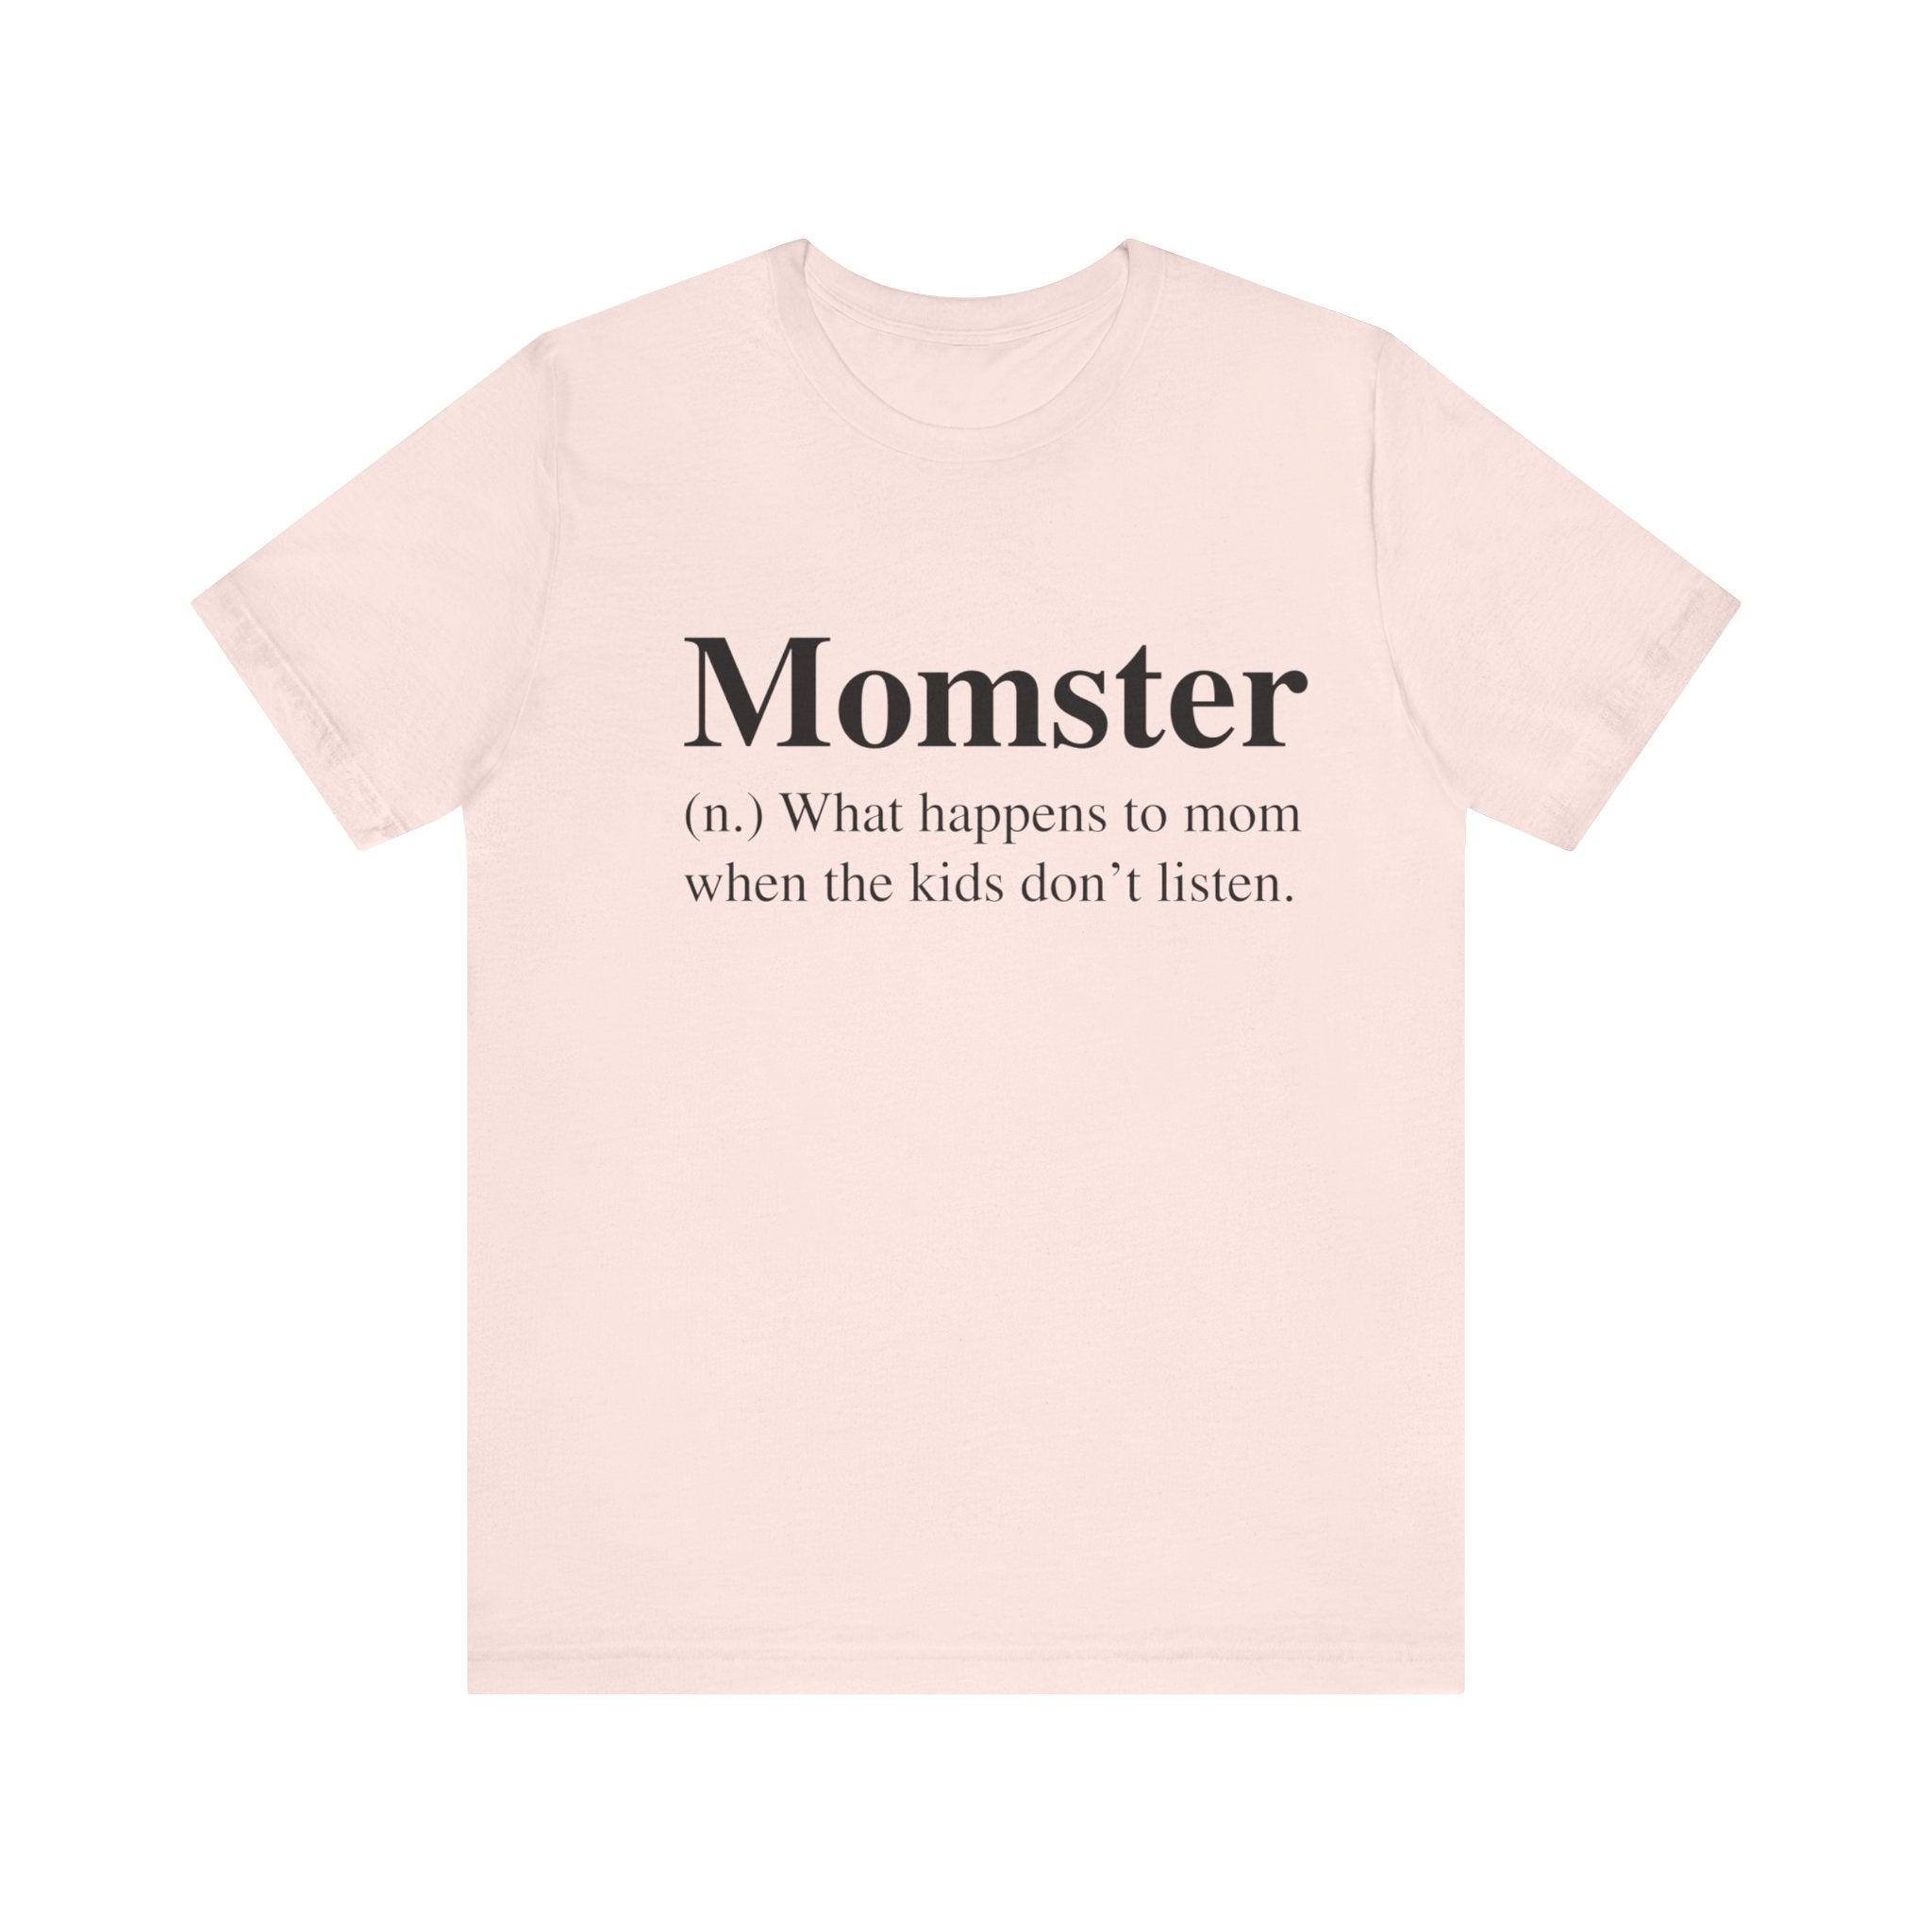 A light pink Momster T-Shirt with the word "momster" defined as "what happens to mom when the kids don't listen" printed in black text on the front.